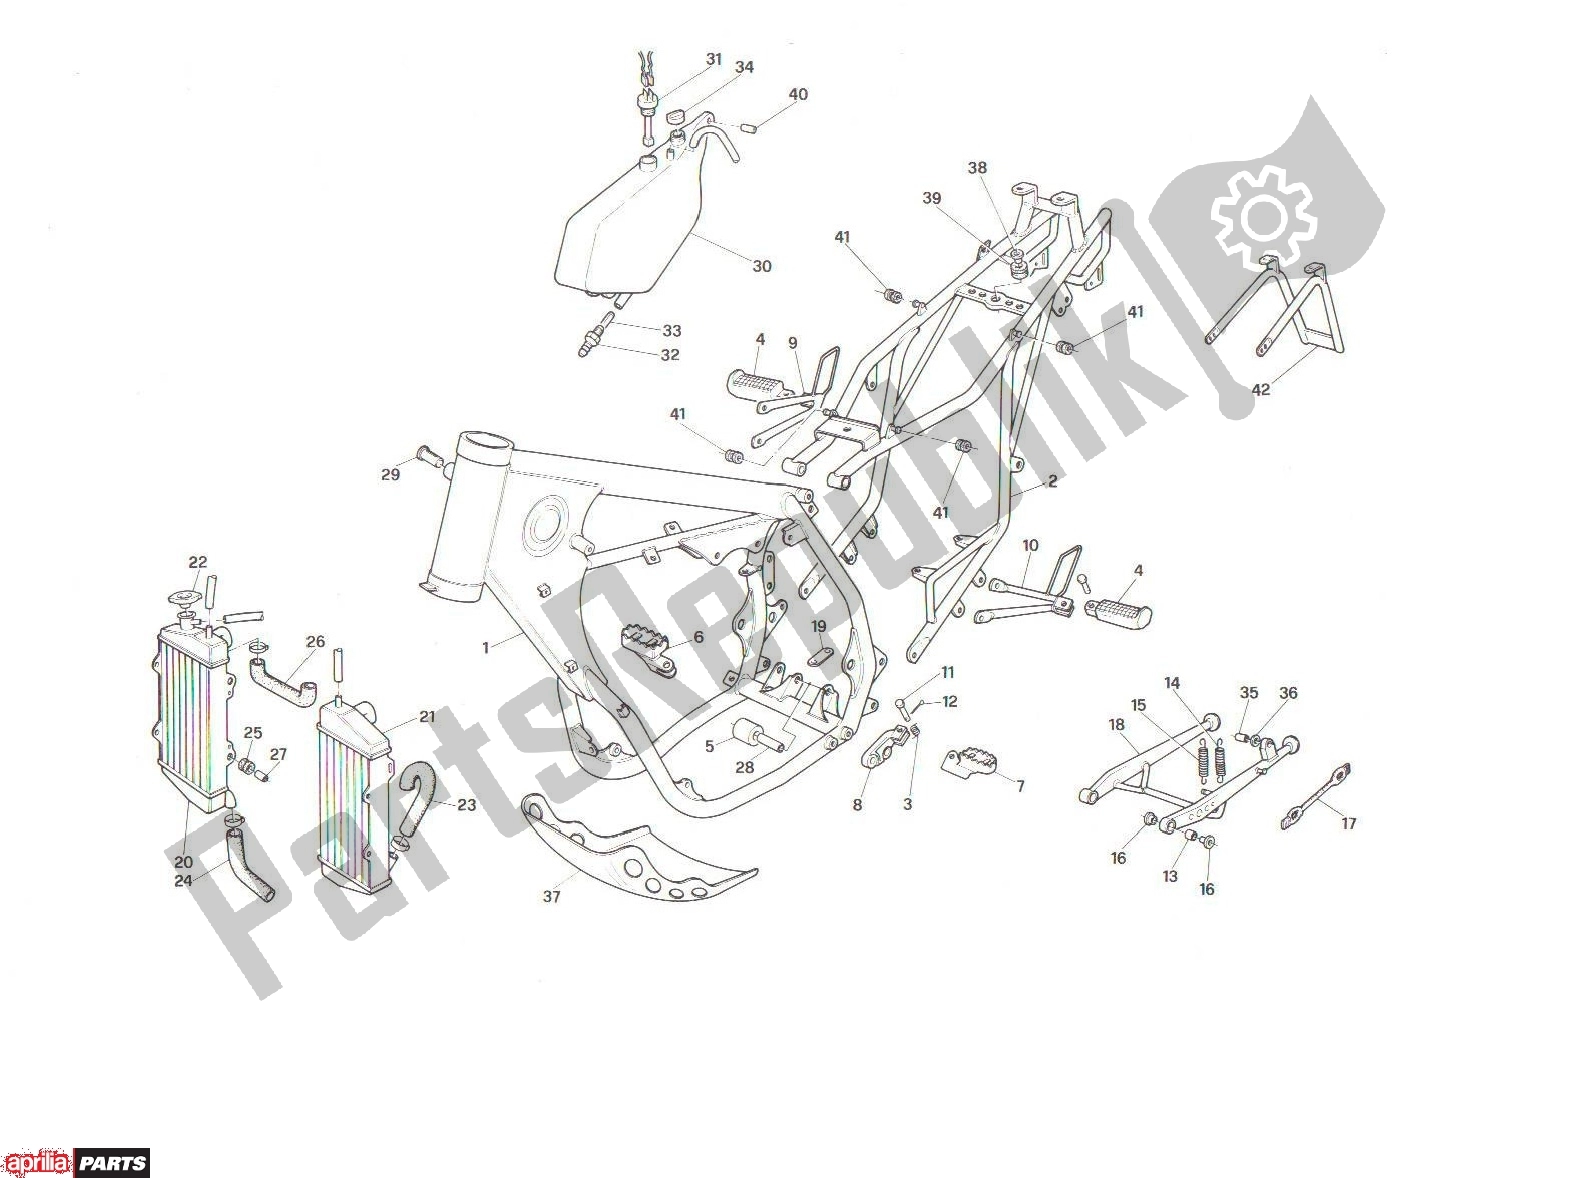 All parts for the Frame of the Aprilia RX 101 125 1989